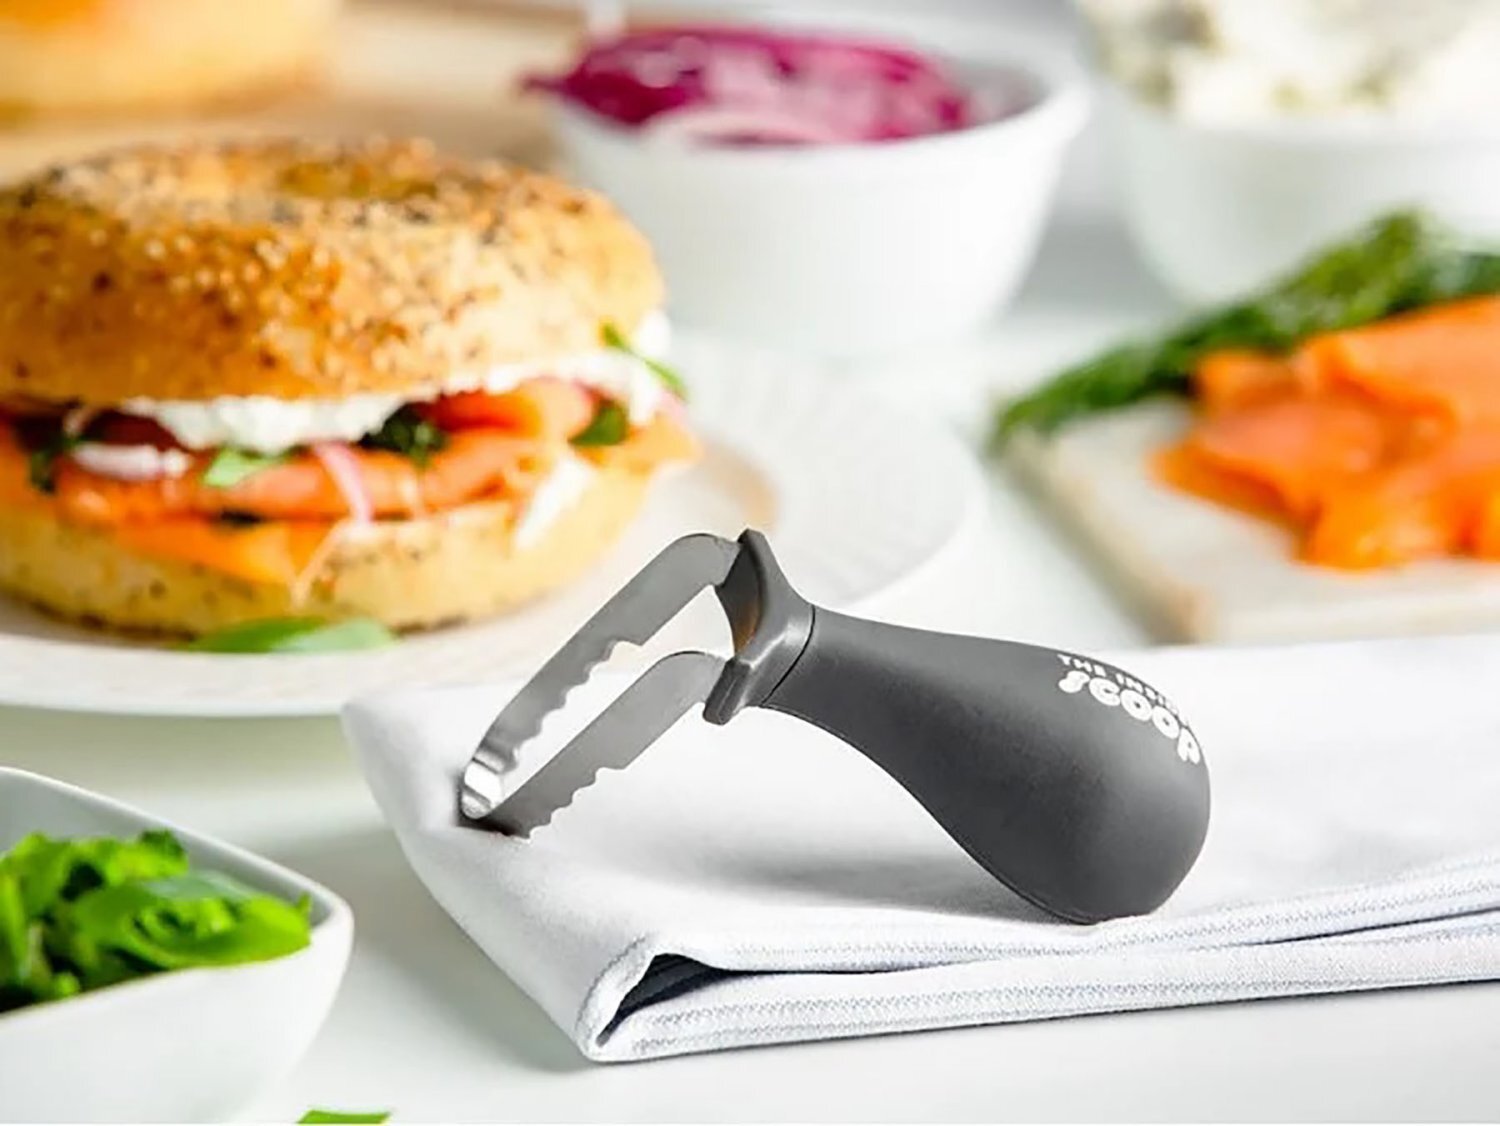 Juome 5 Wheel Pastry Cutter Stainless Pizza Slicer Multi-Round Dough Cutter Roller Cookie Pastry Knife Divider with Handle